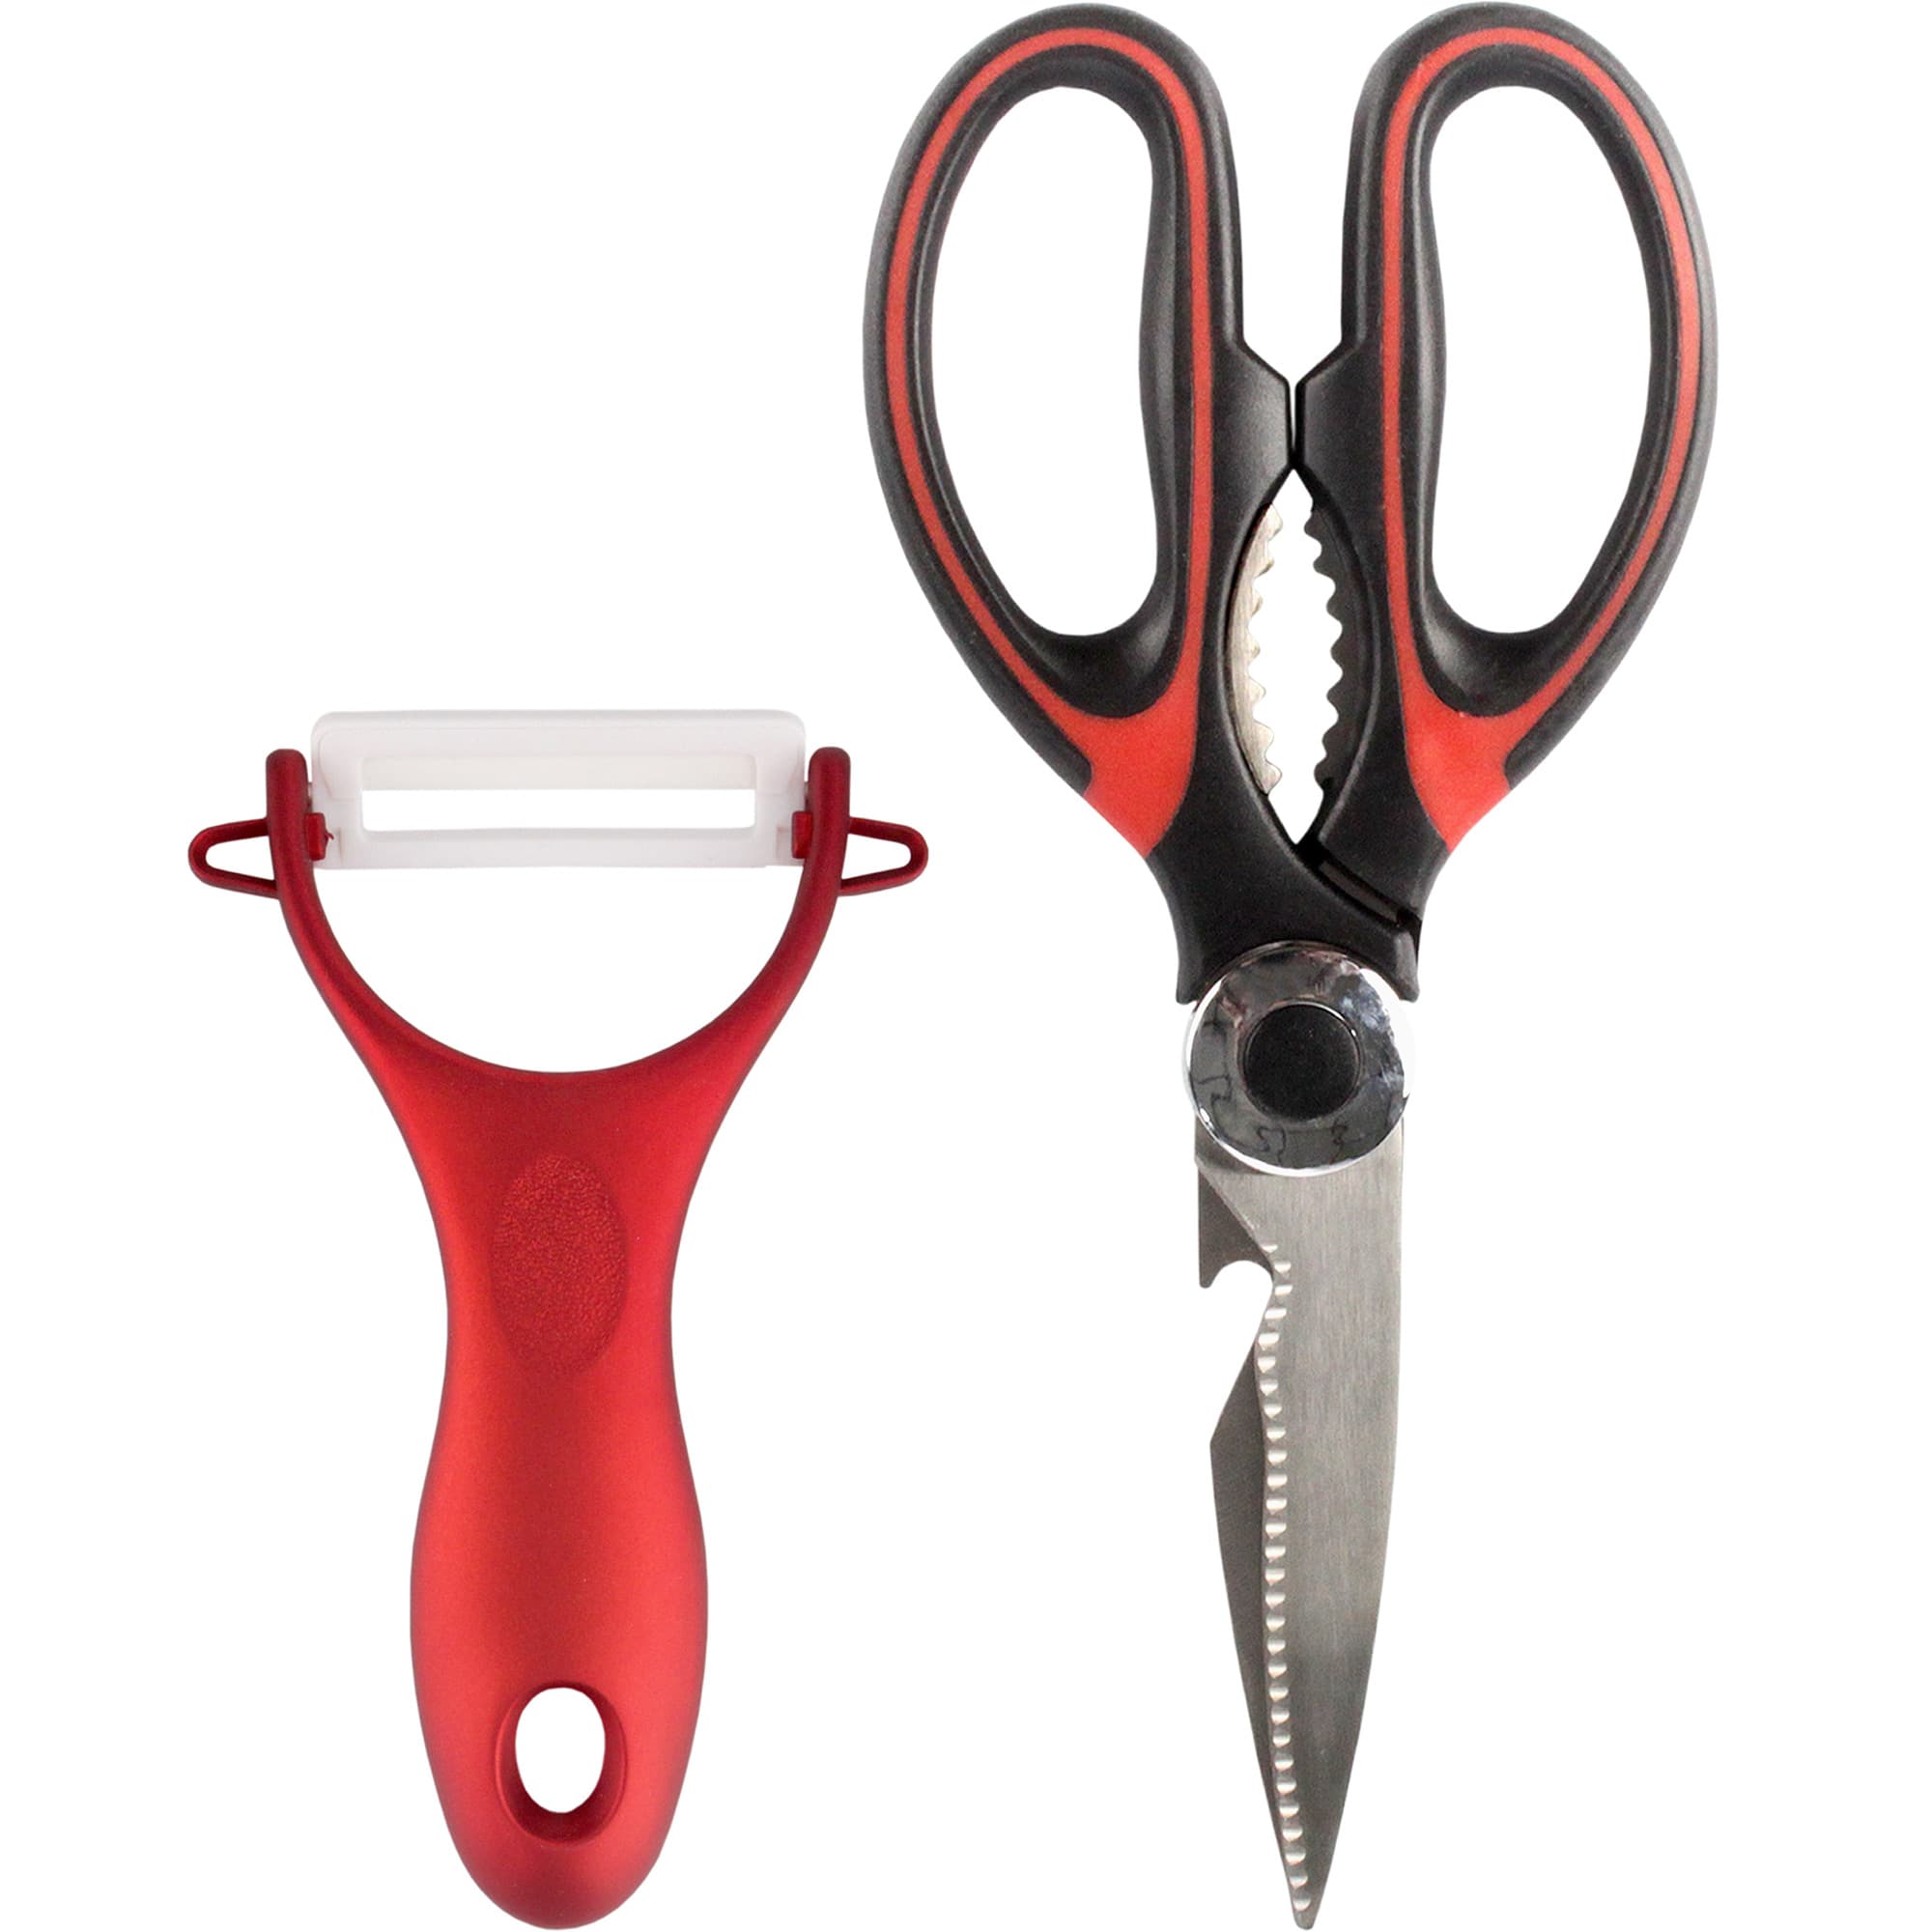 5-in-1 Kitchen Scissors with Magnetic Sheath - Kitchen Pro